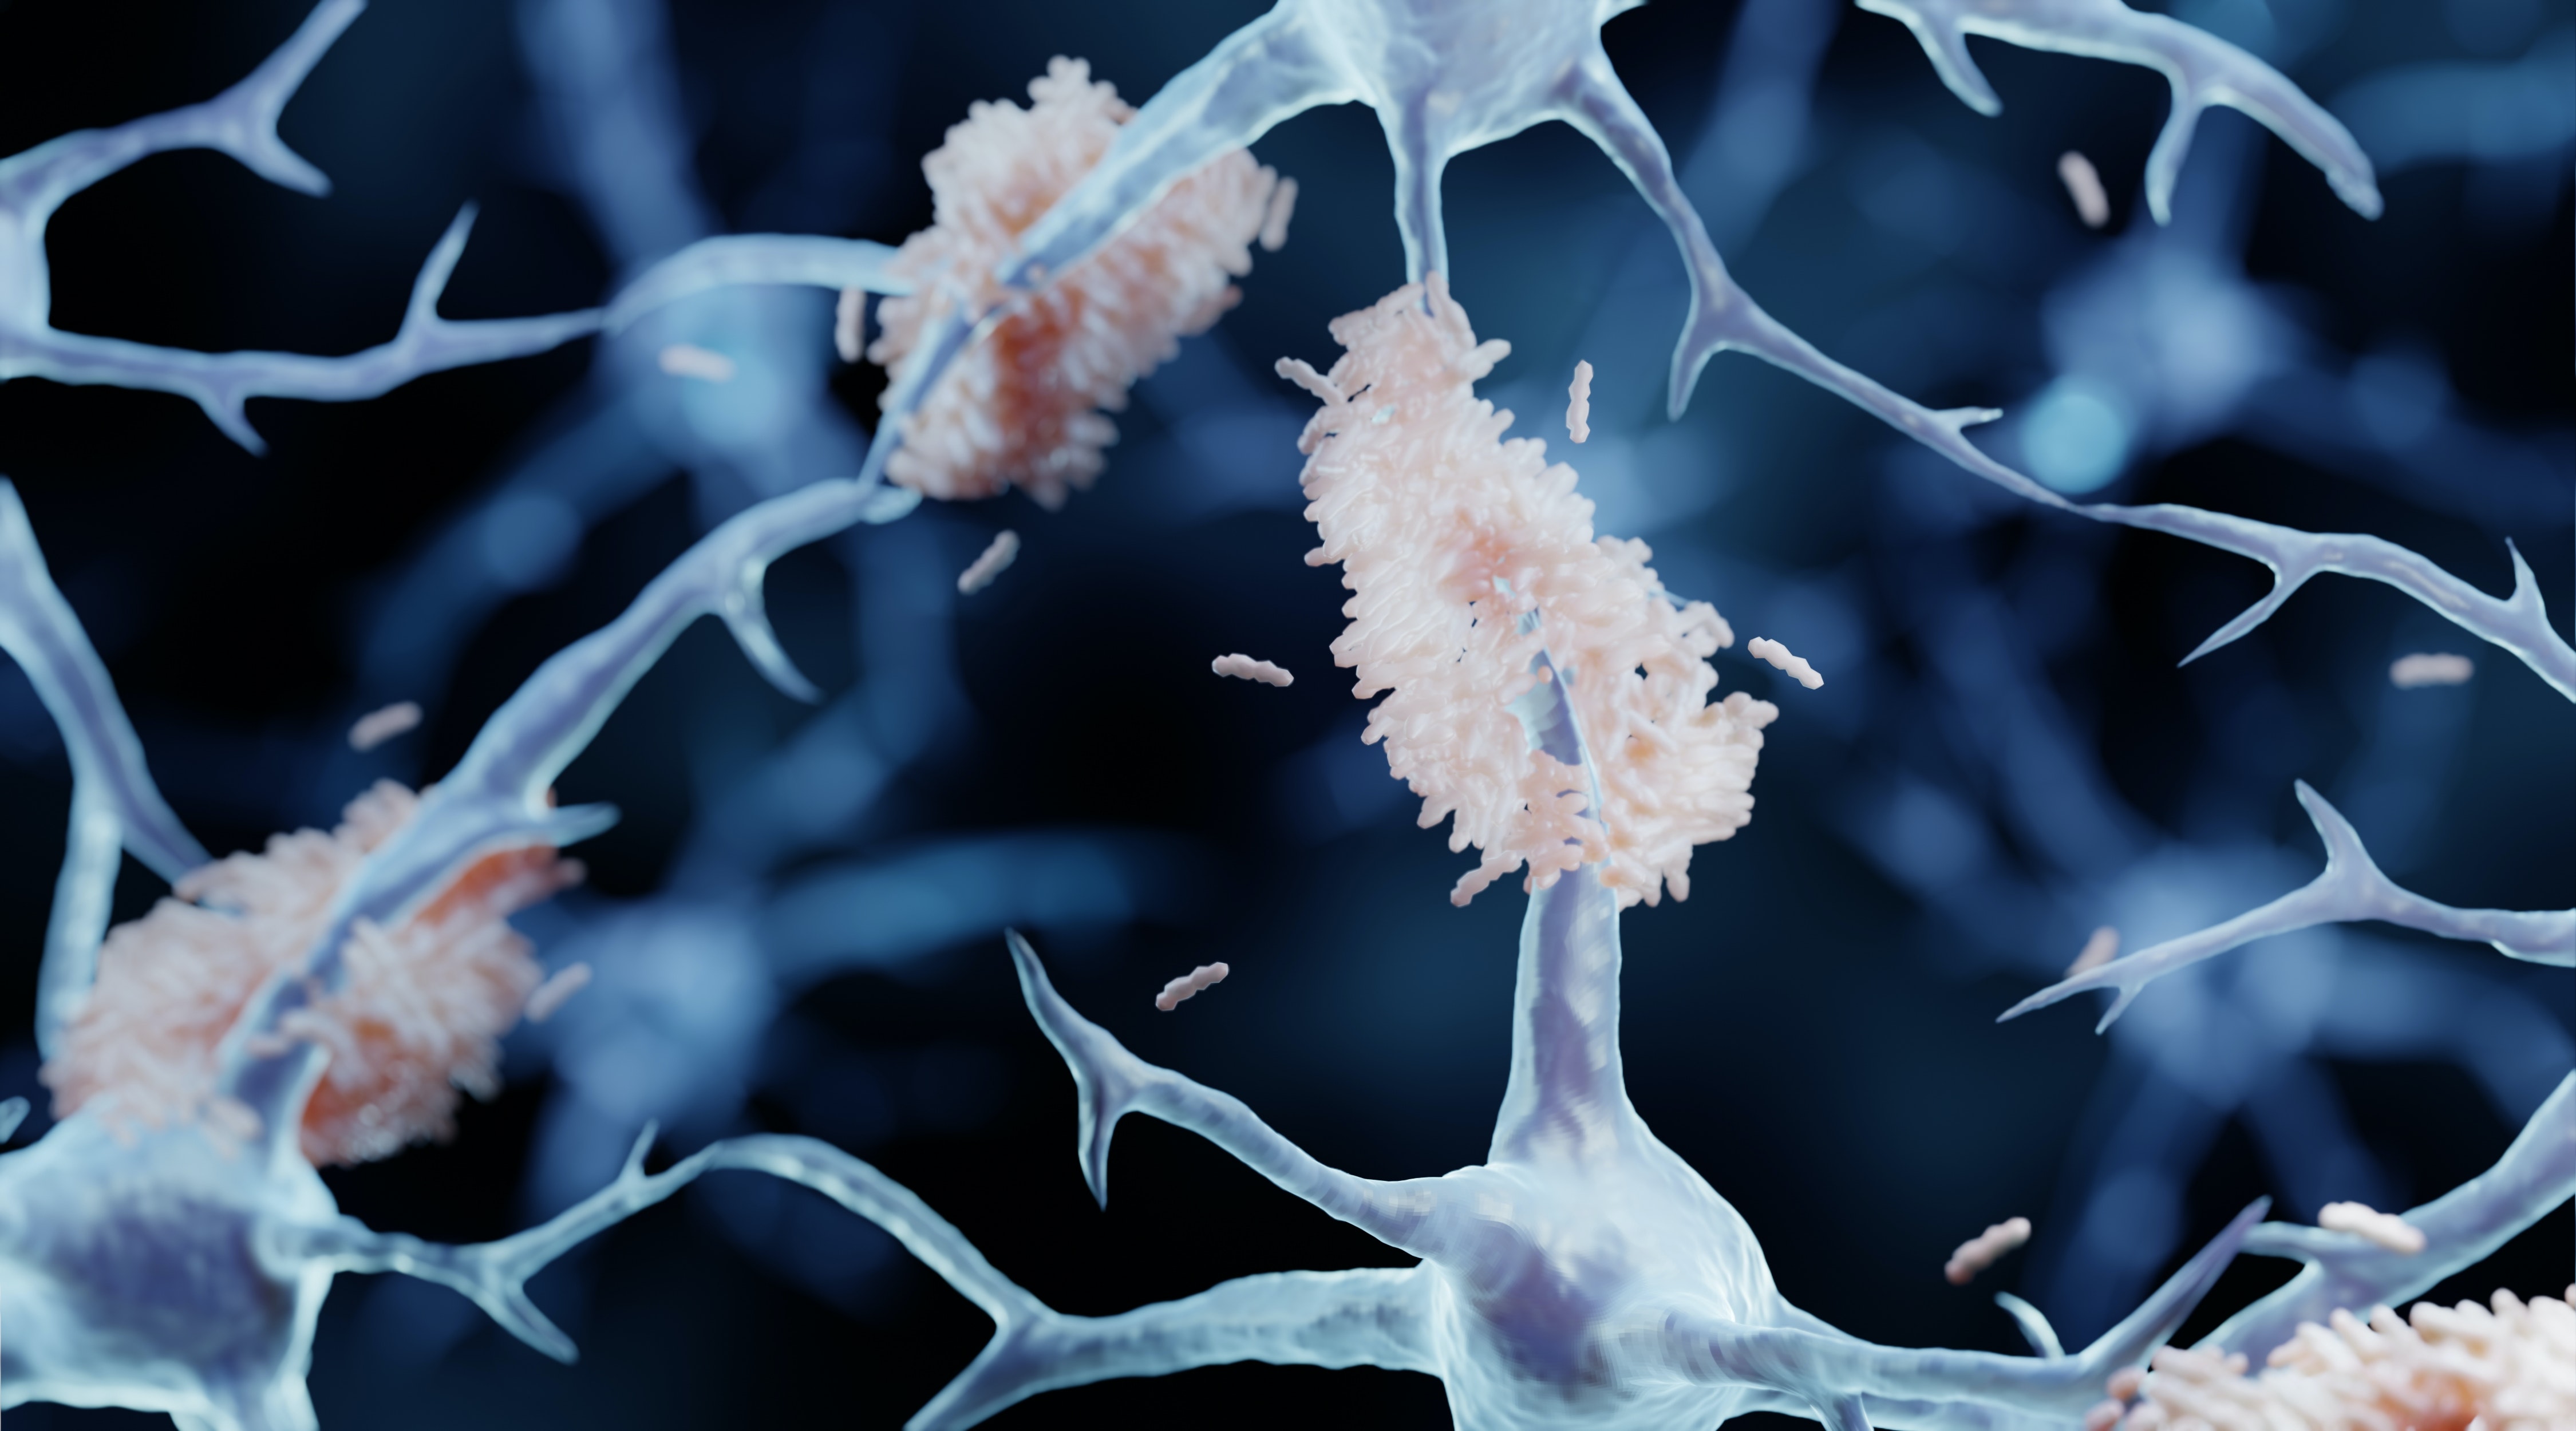 Alzheimer's disease illustration showing misfolded proteins called plaques that aggregate between nerve cells in people with Alzheimer's.